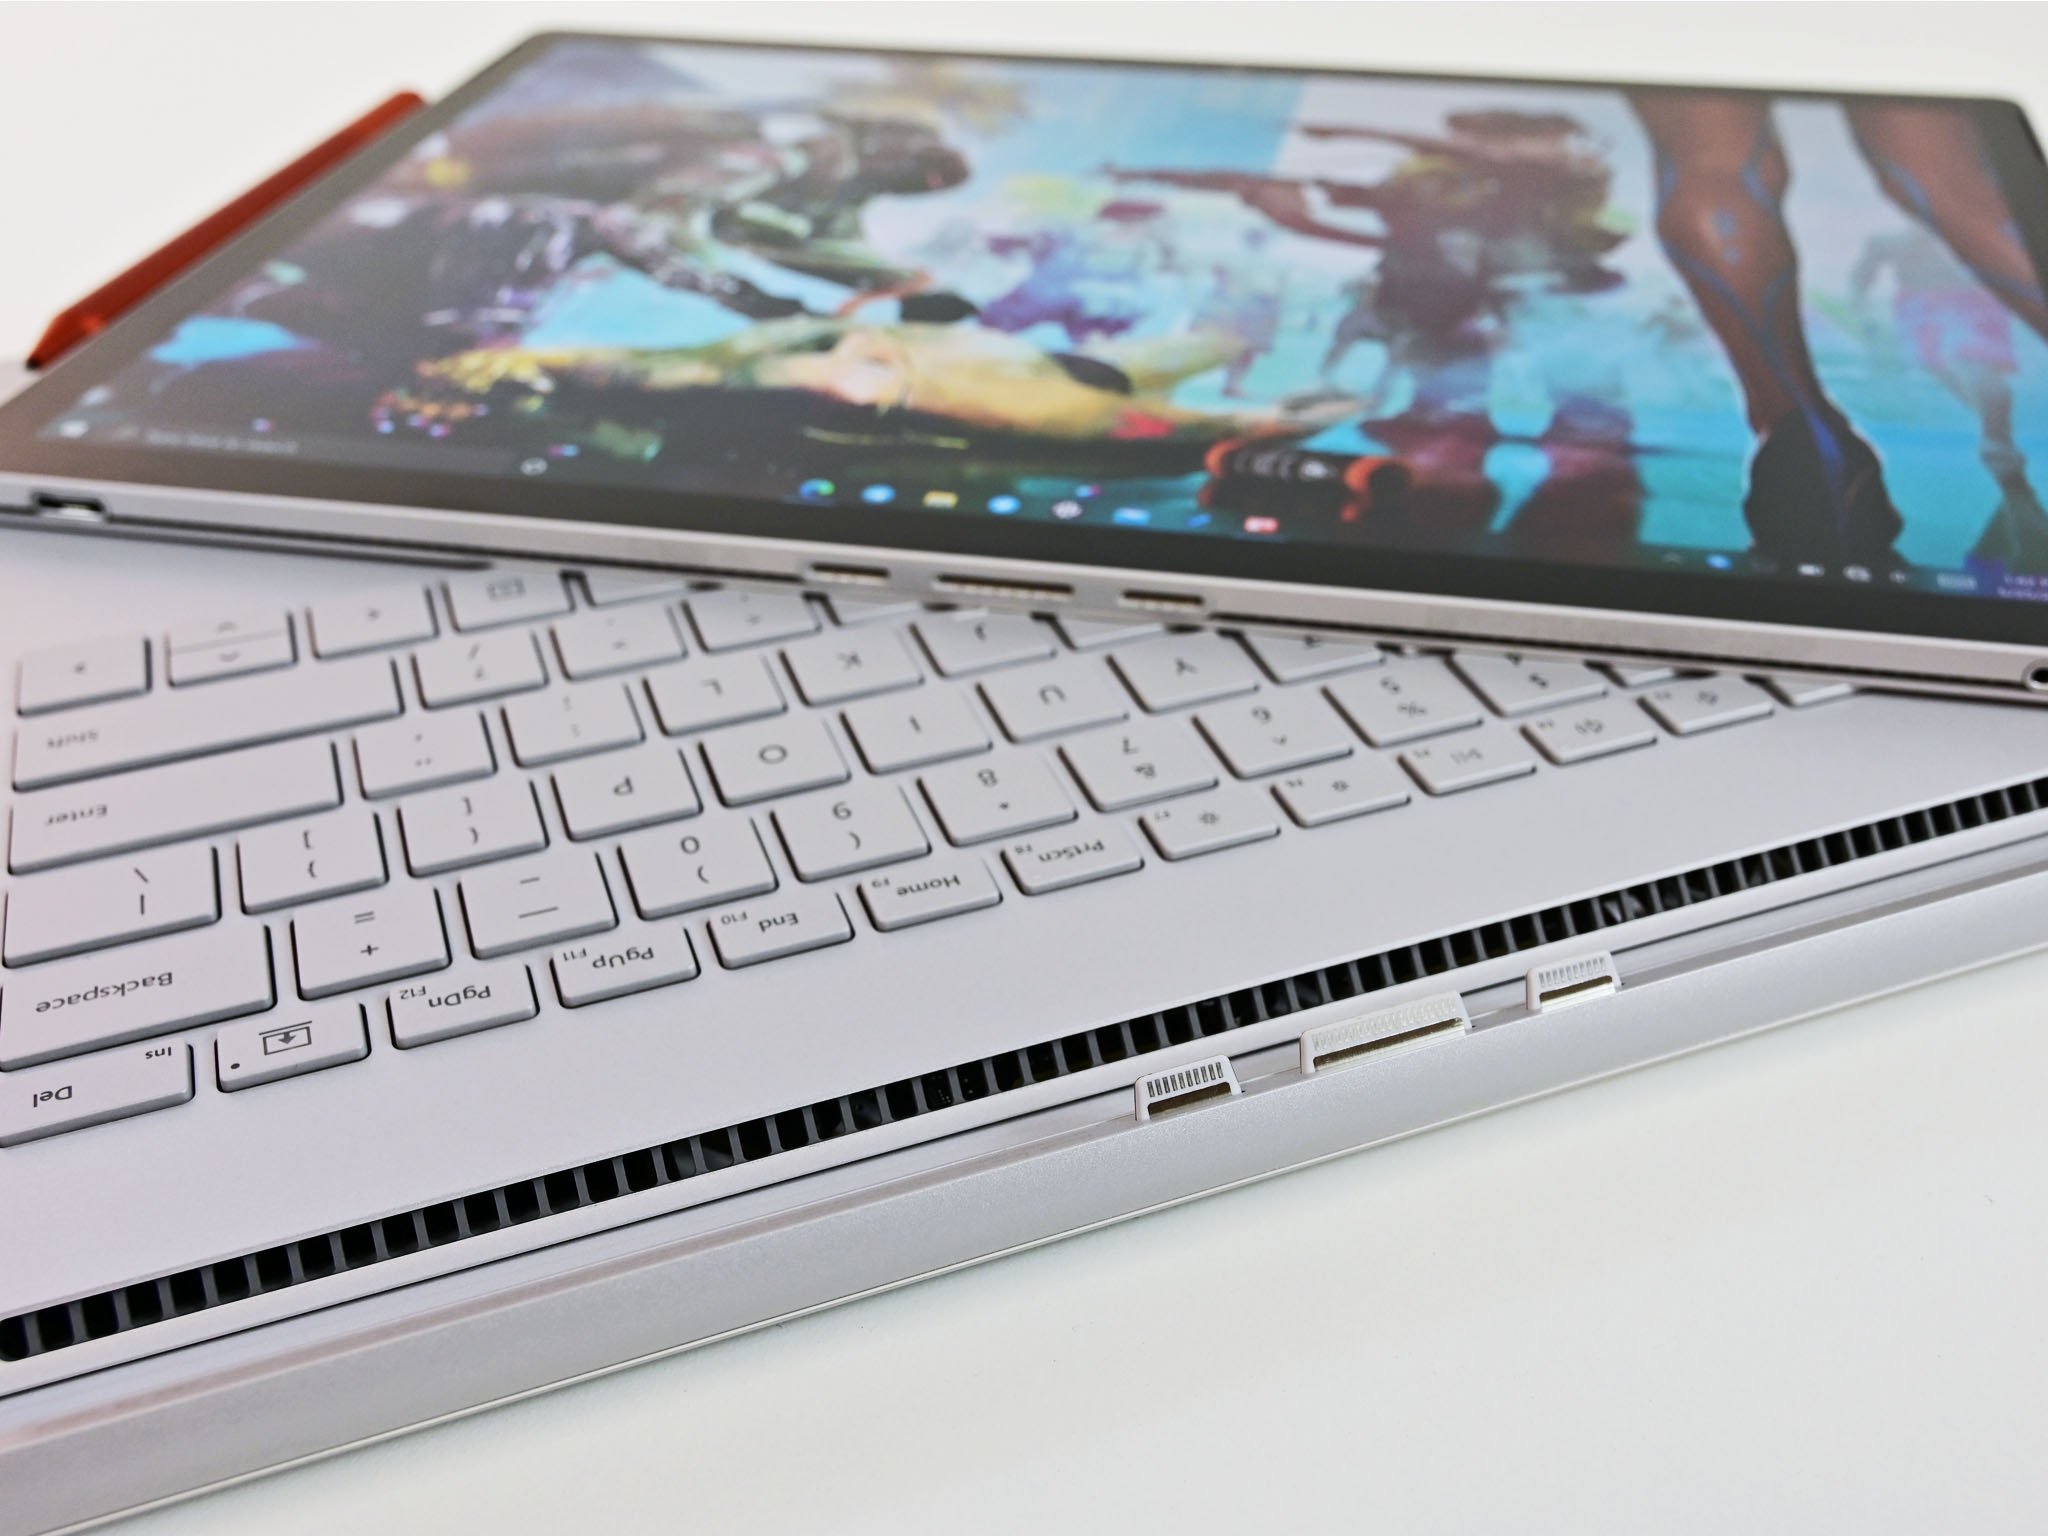 Microsoft investigating Surface Book 3 'screen blackout' issues